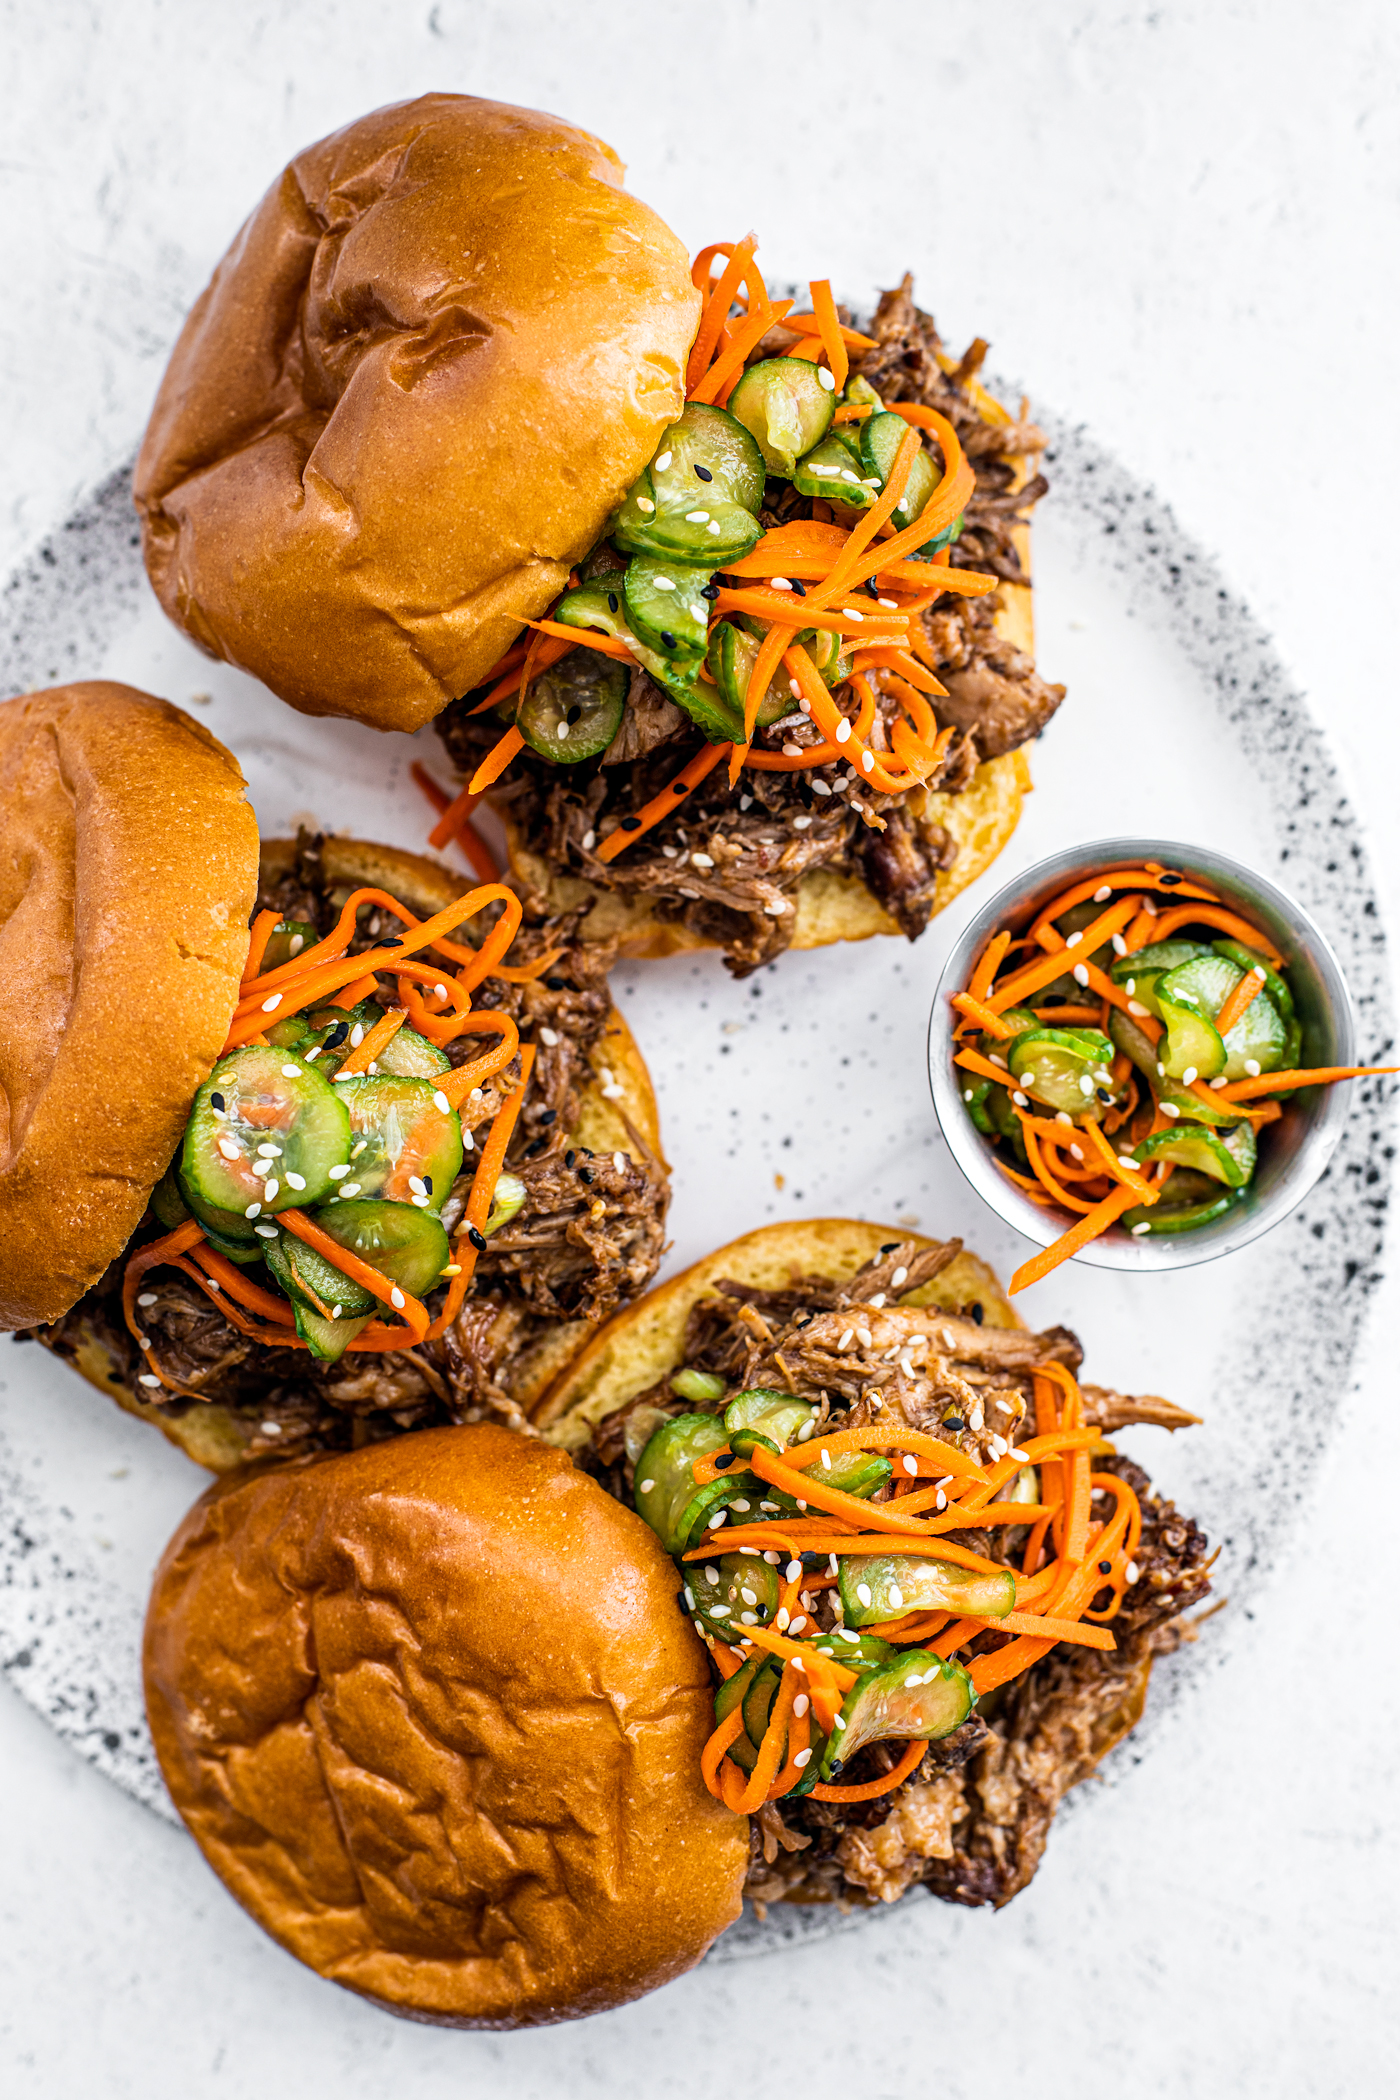 Serving plate with pulled pork sandwiches topped with pickled cucumbers and carrots.